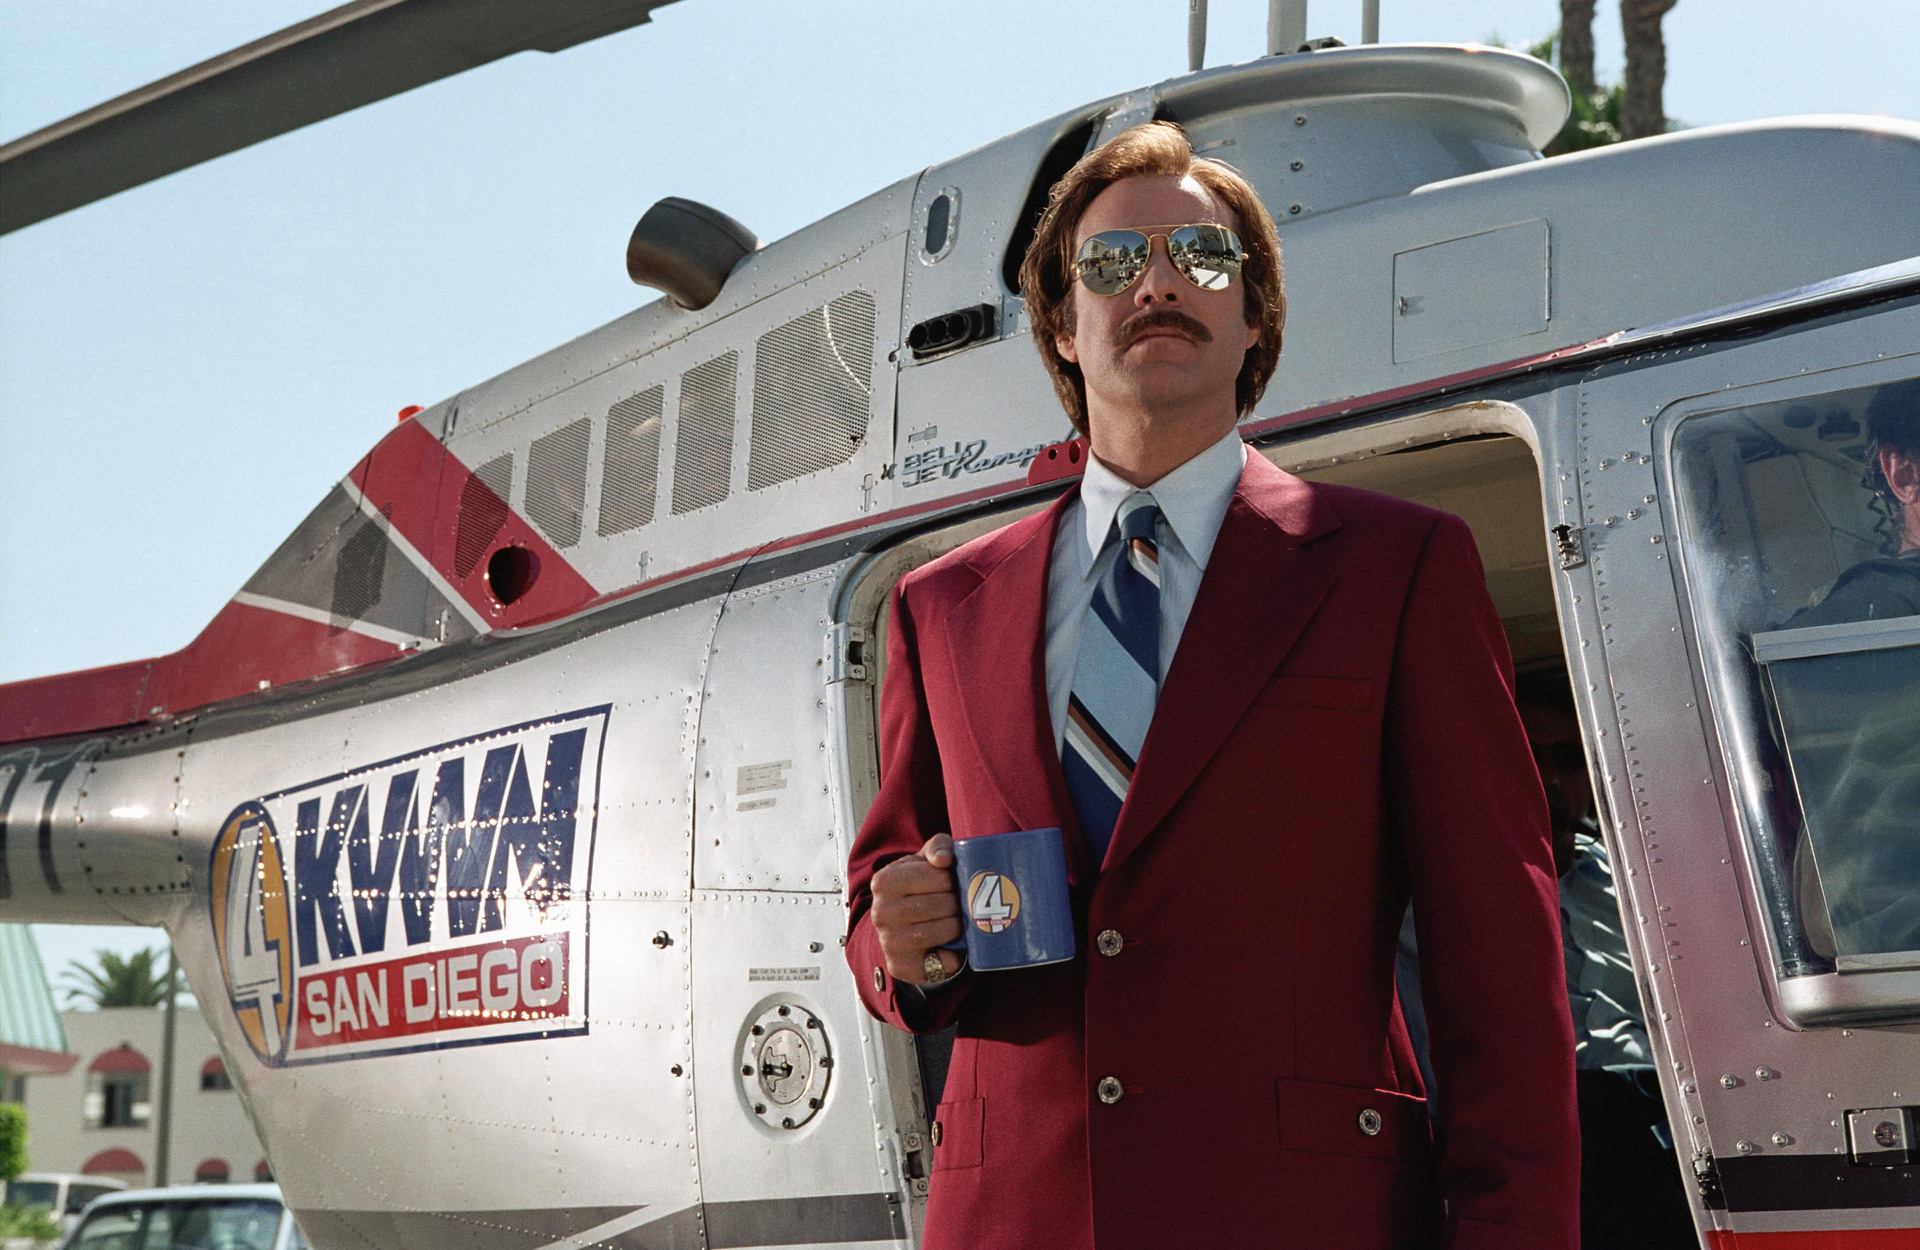 ANCHORMAN: THE LEGEND OF RON BURGUNDY - Ron Burgundy's (Will Ferrell) Suit - Image 5 of 5